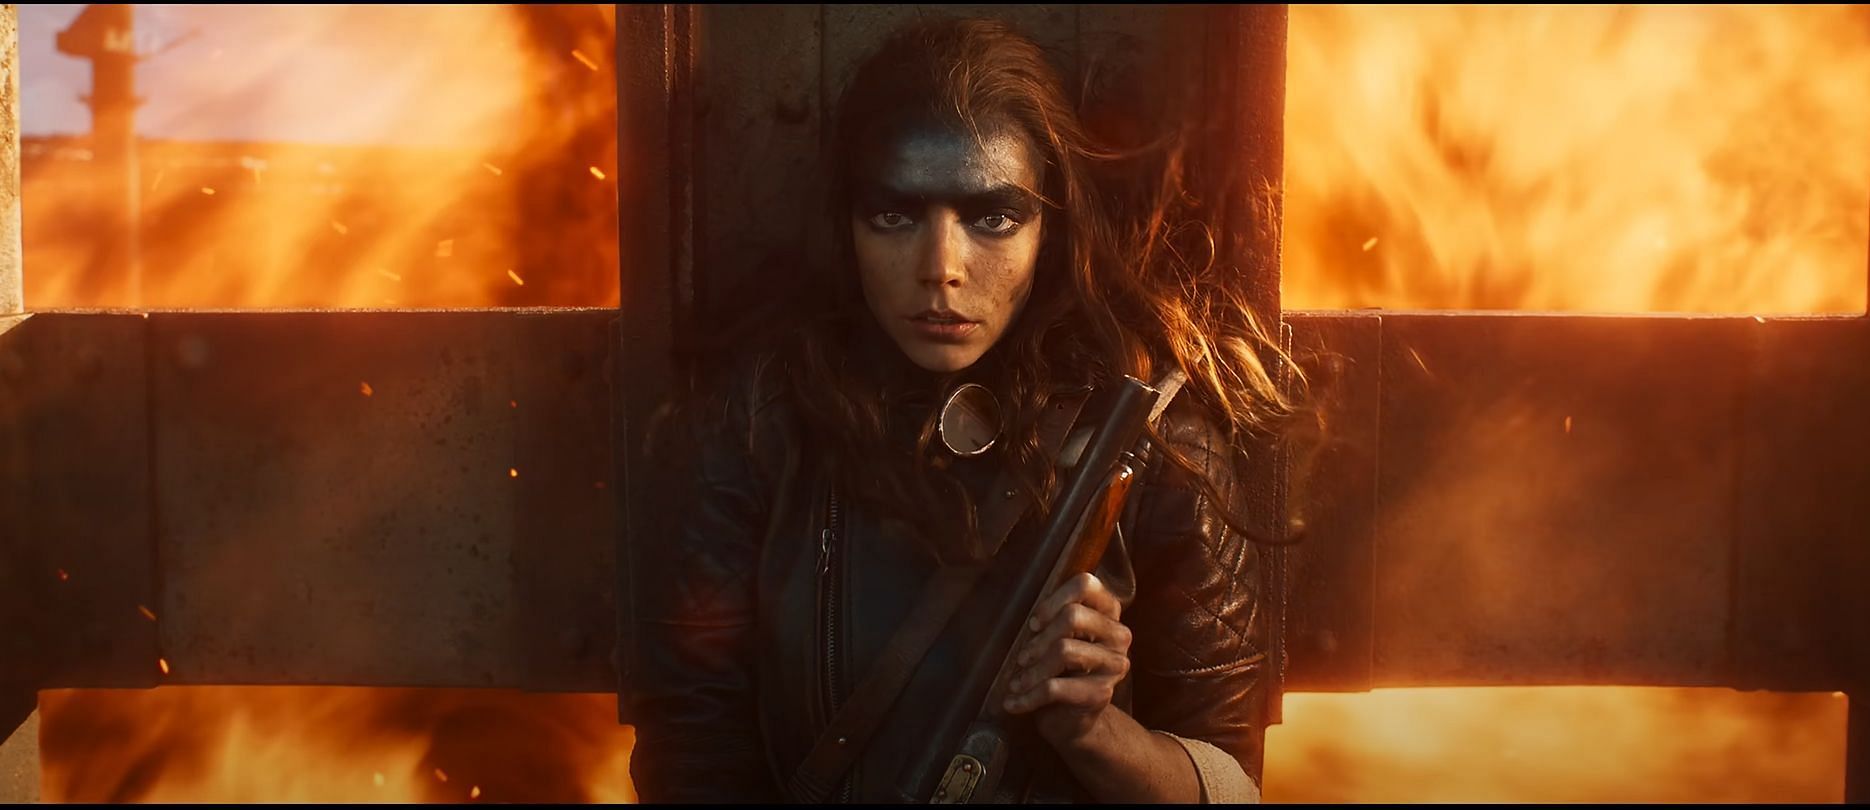 A shot from the trailer (Image via Warner Bros. Pictures, Mad Max: Furiosa, 1:54)